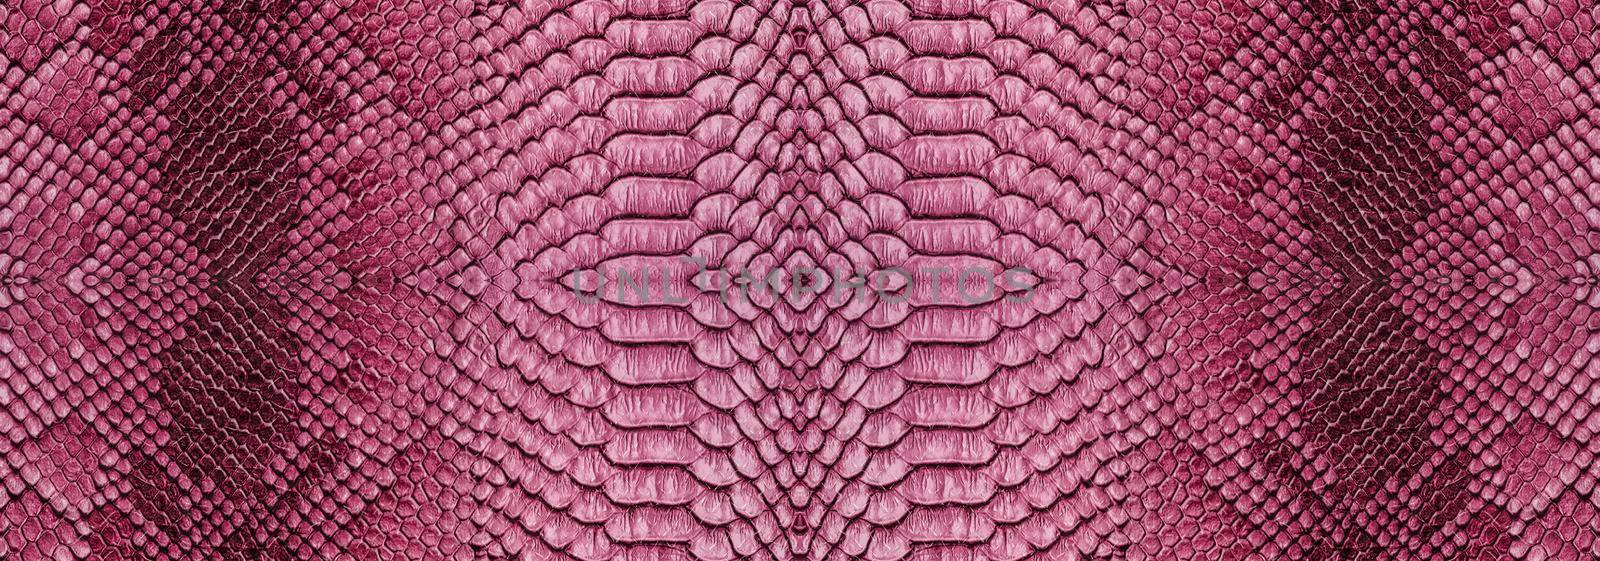 Snake skin texture closeup background. Panoramic web banner with copy space background by vikiriki